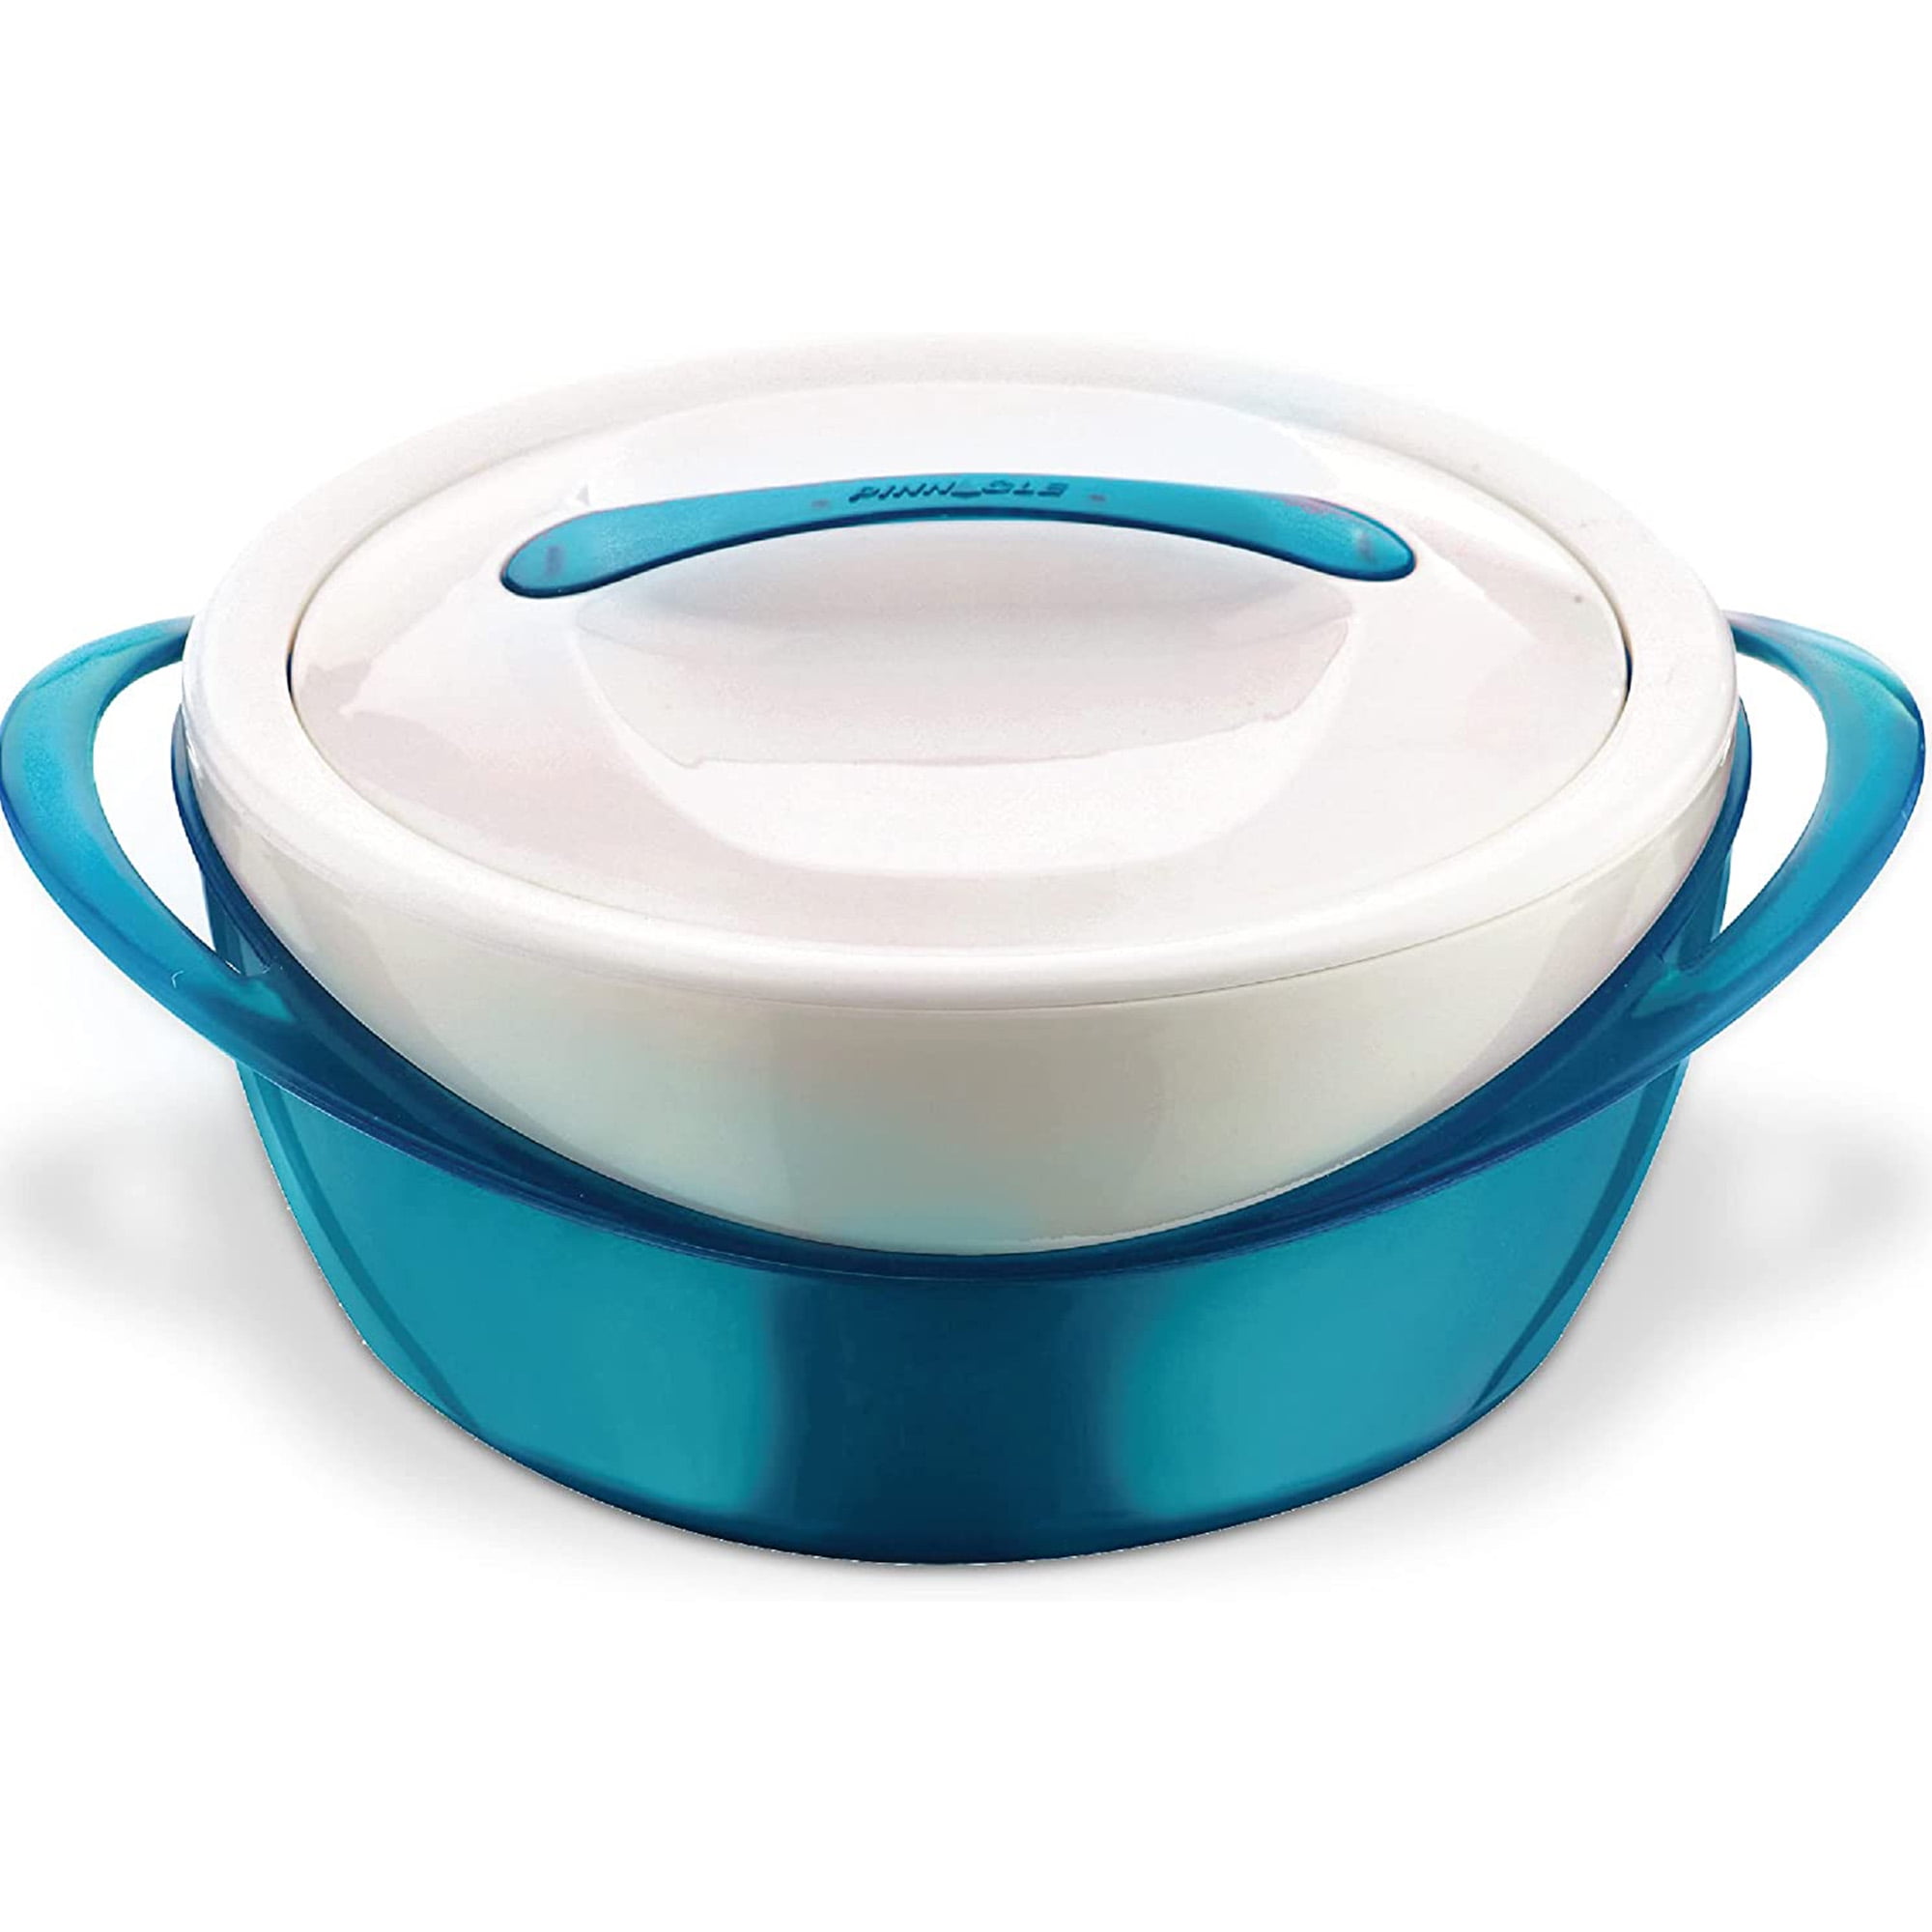 Pinnacle Thermoware Pinnacle Serving Salad/ Soup Dish Bowl - Thermal  Inulated Bowl with Lid - Great Bowl for Holiday, Dinner and Party (3.6 qt